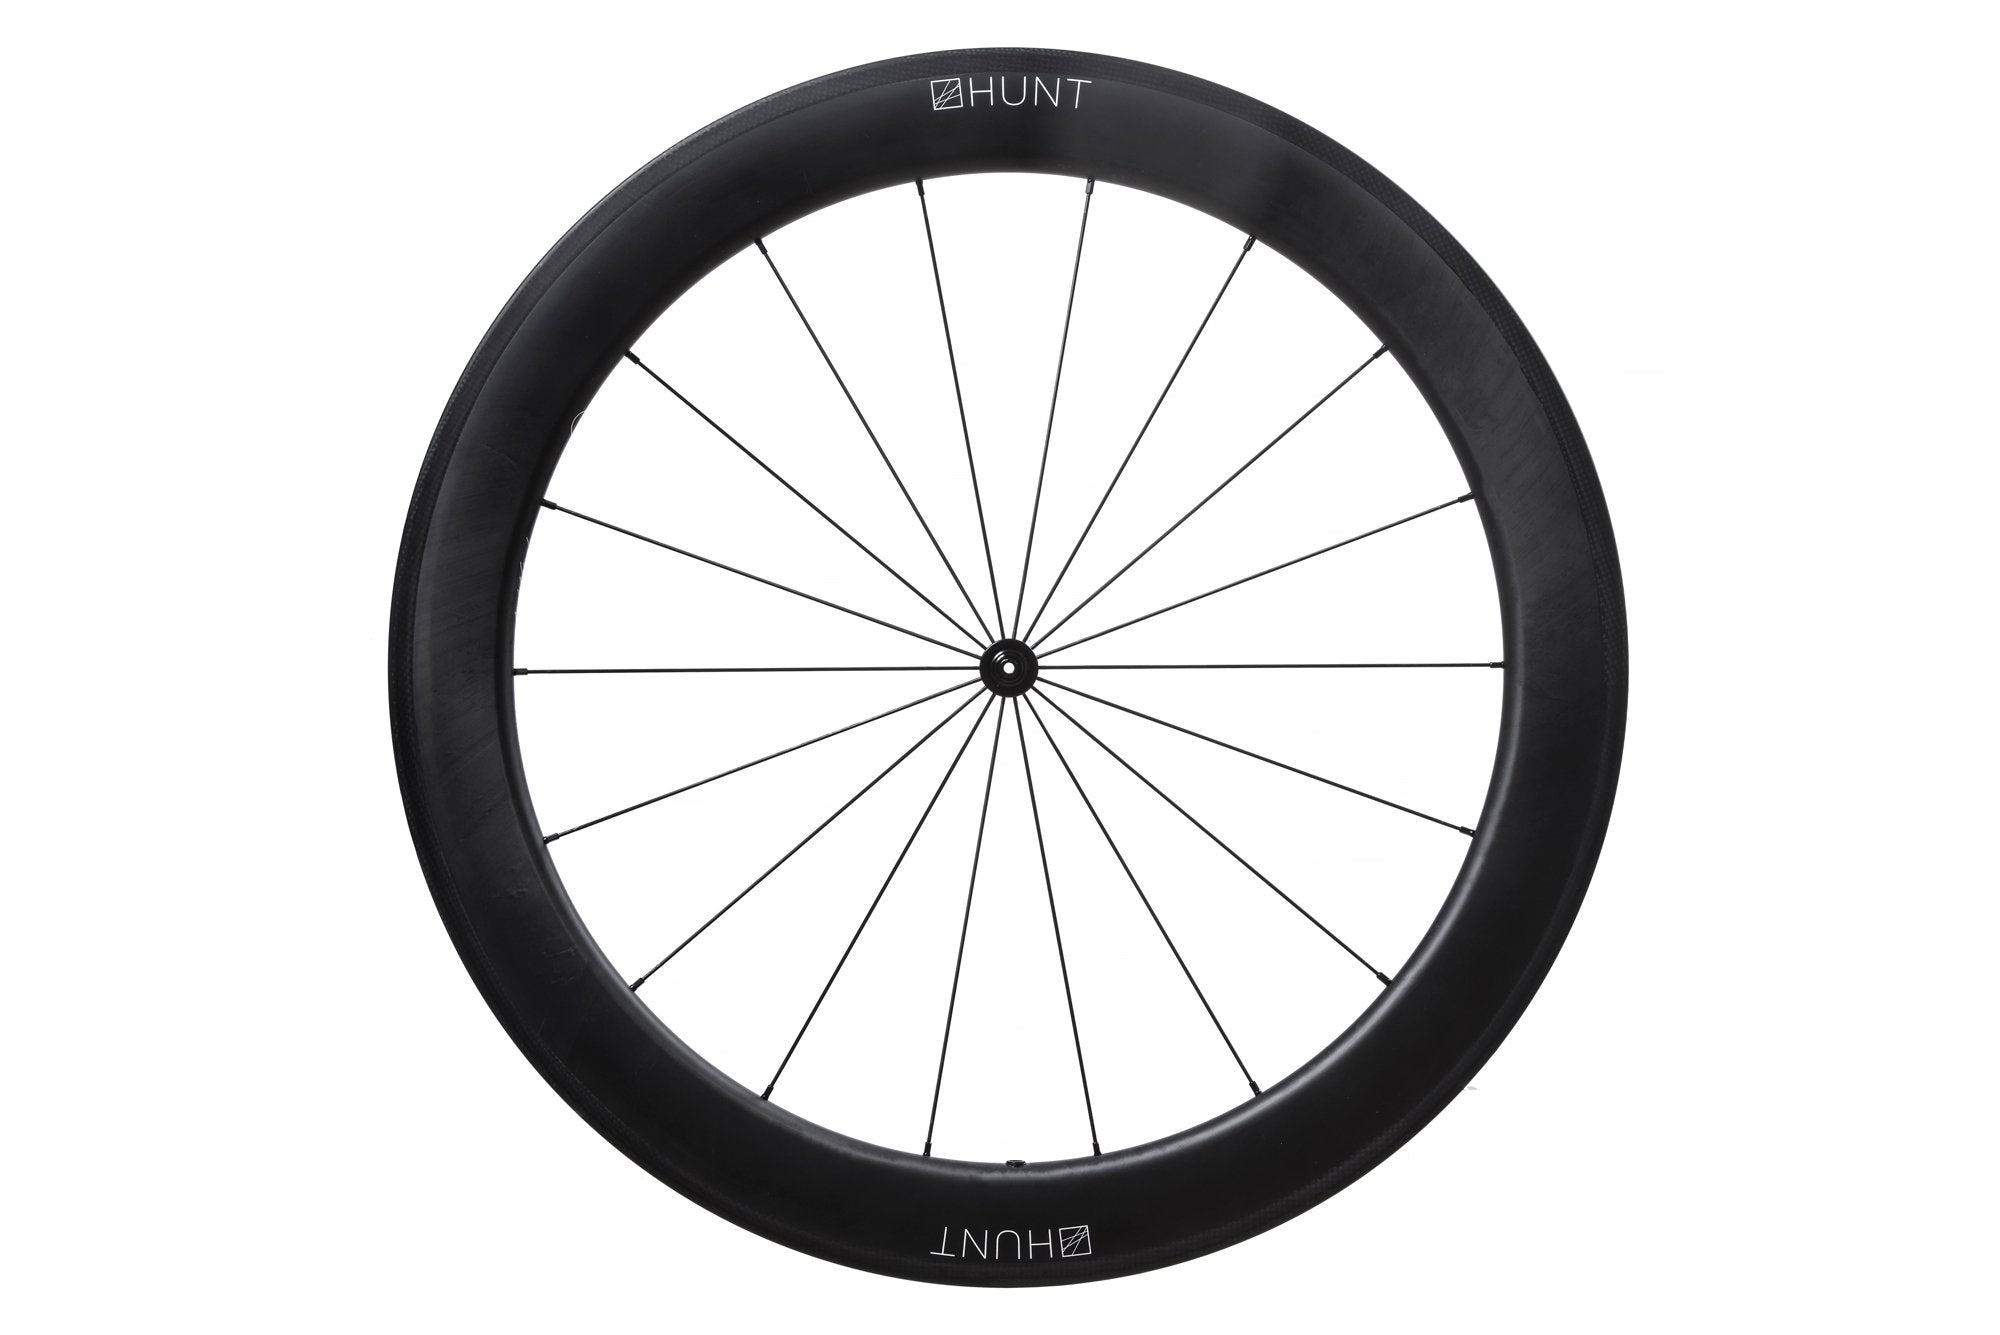 <h1>AERODYNAMICIST PROFILE</h1><i>Designed around a 19mm internal rim width optimised for a 25c tyre (but will of course work without compromise with both 23c and 28c tyres). Naturally, as with all of our rims, they feature a hooked tyre retention design for safety, and are both fully ETRTO-compatible and tubeless-ready.</i>